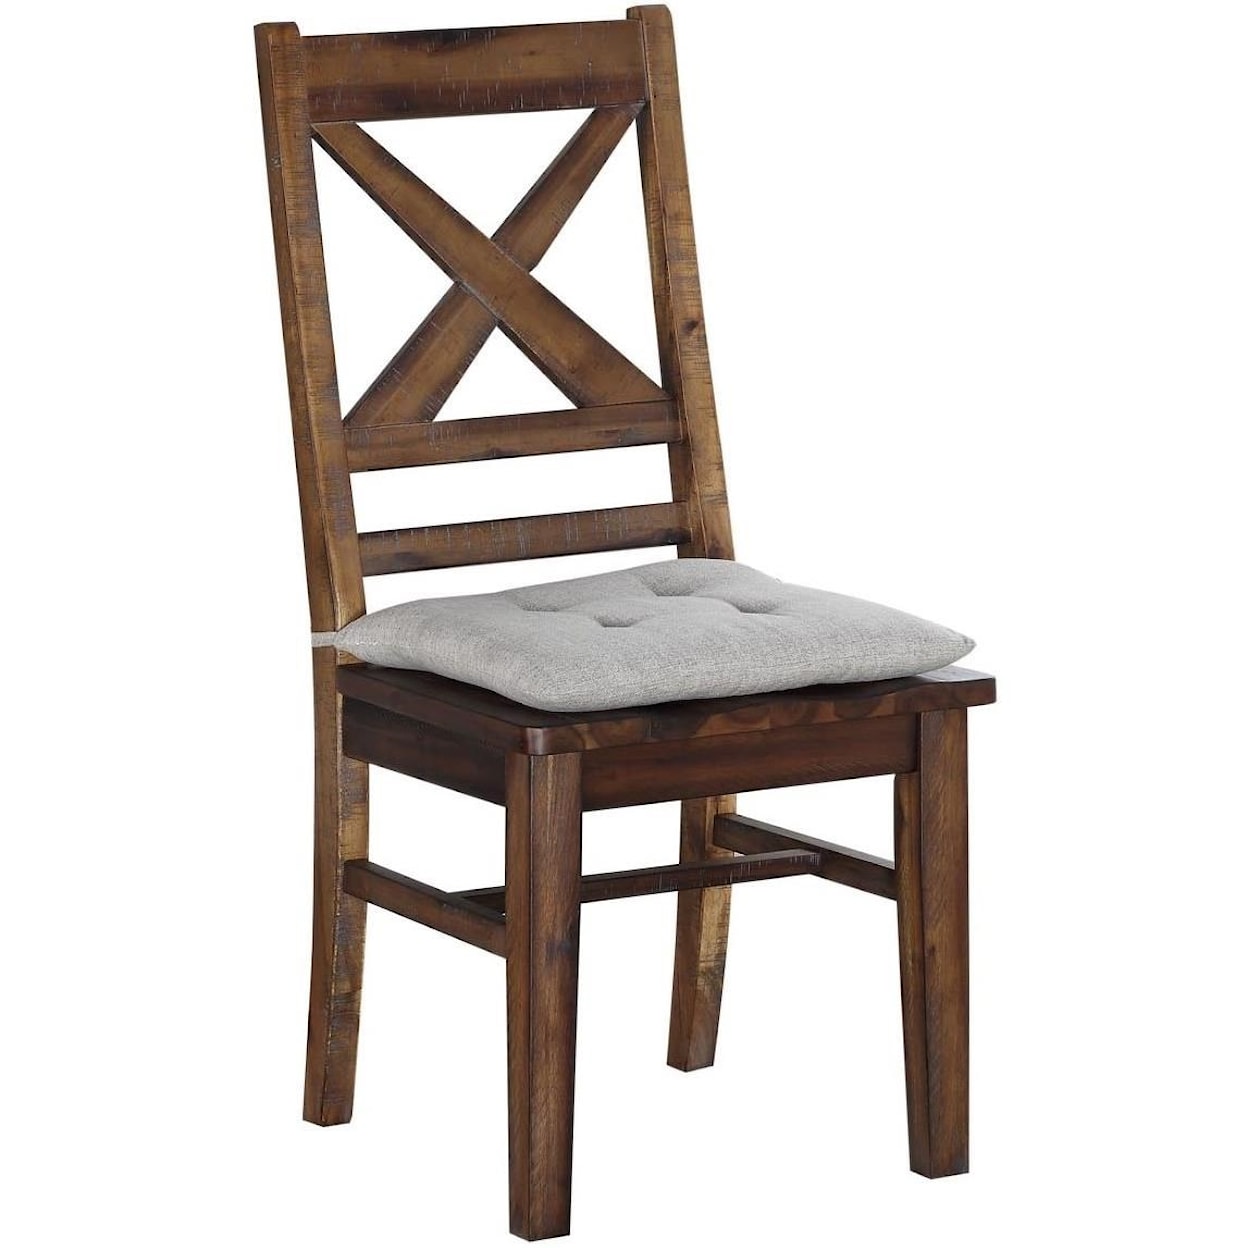 Avalon Furniture D526 Dining Chair